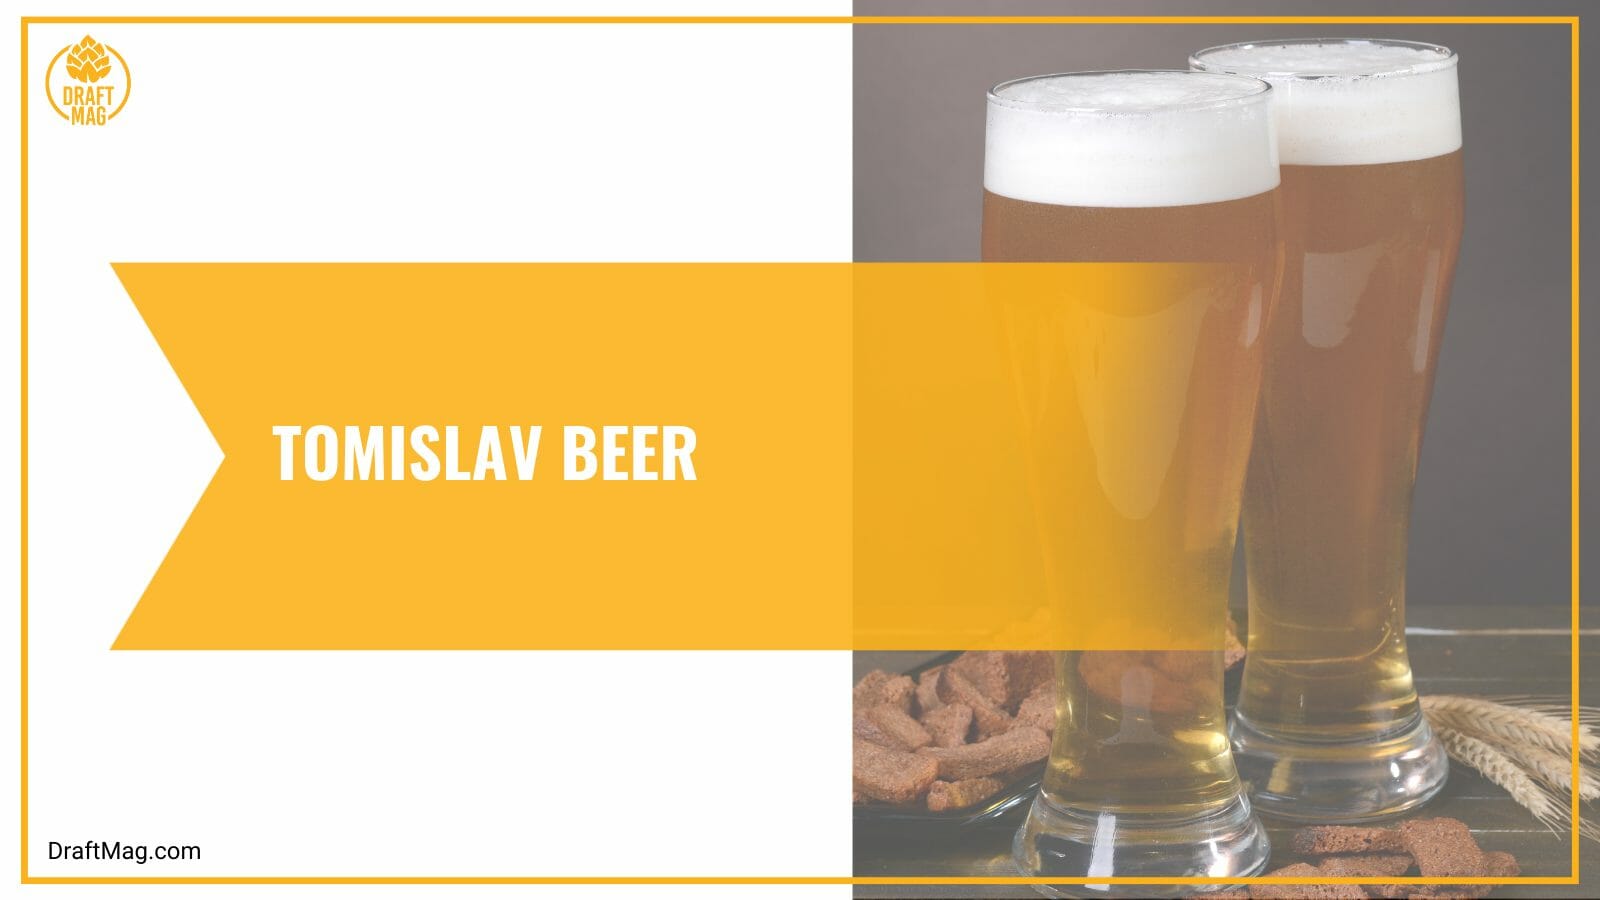 Tomislav beer with roasted malts